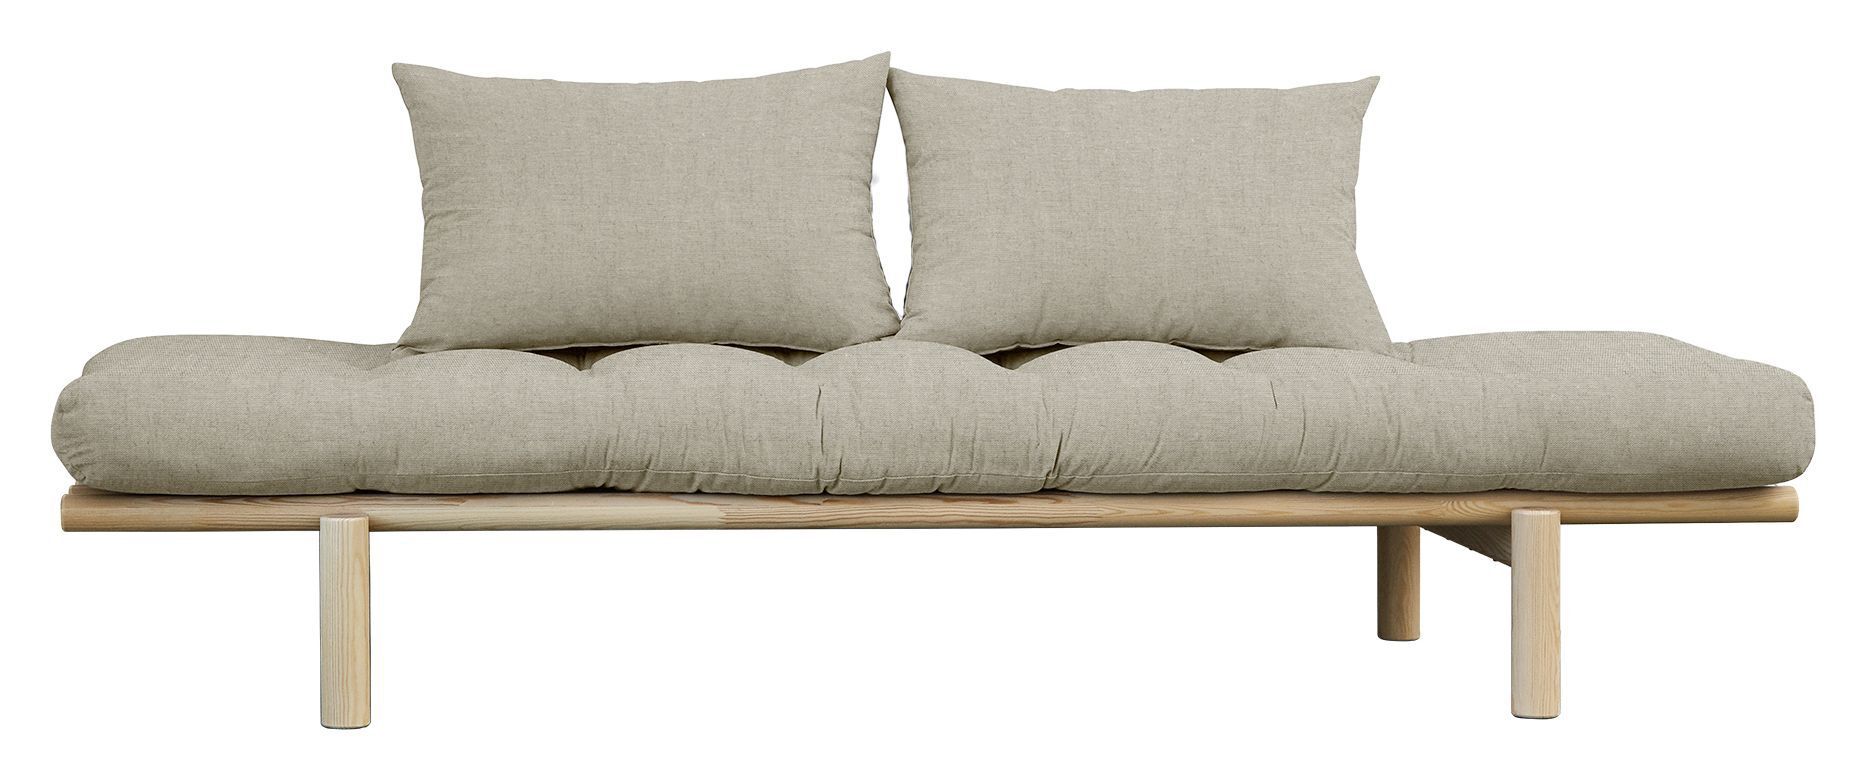 Karup Design Pace Daybed, linen/Natur   Unoliving